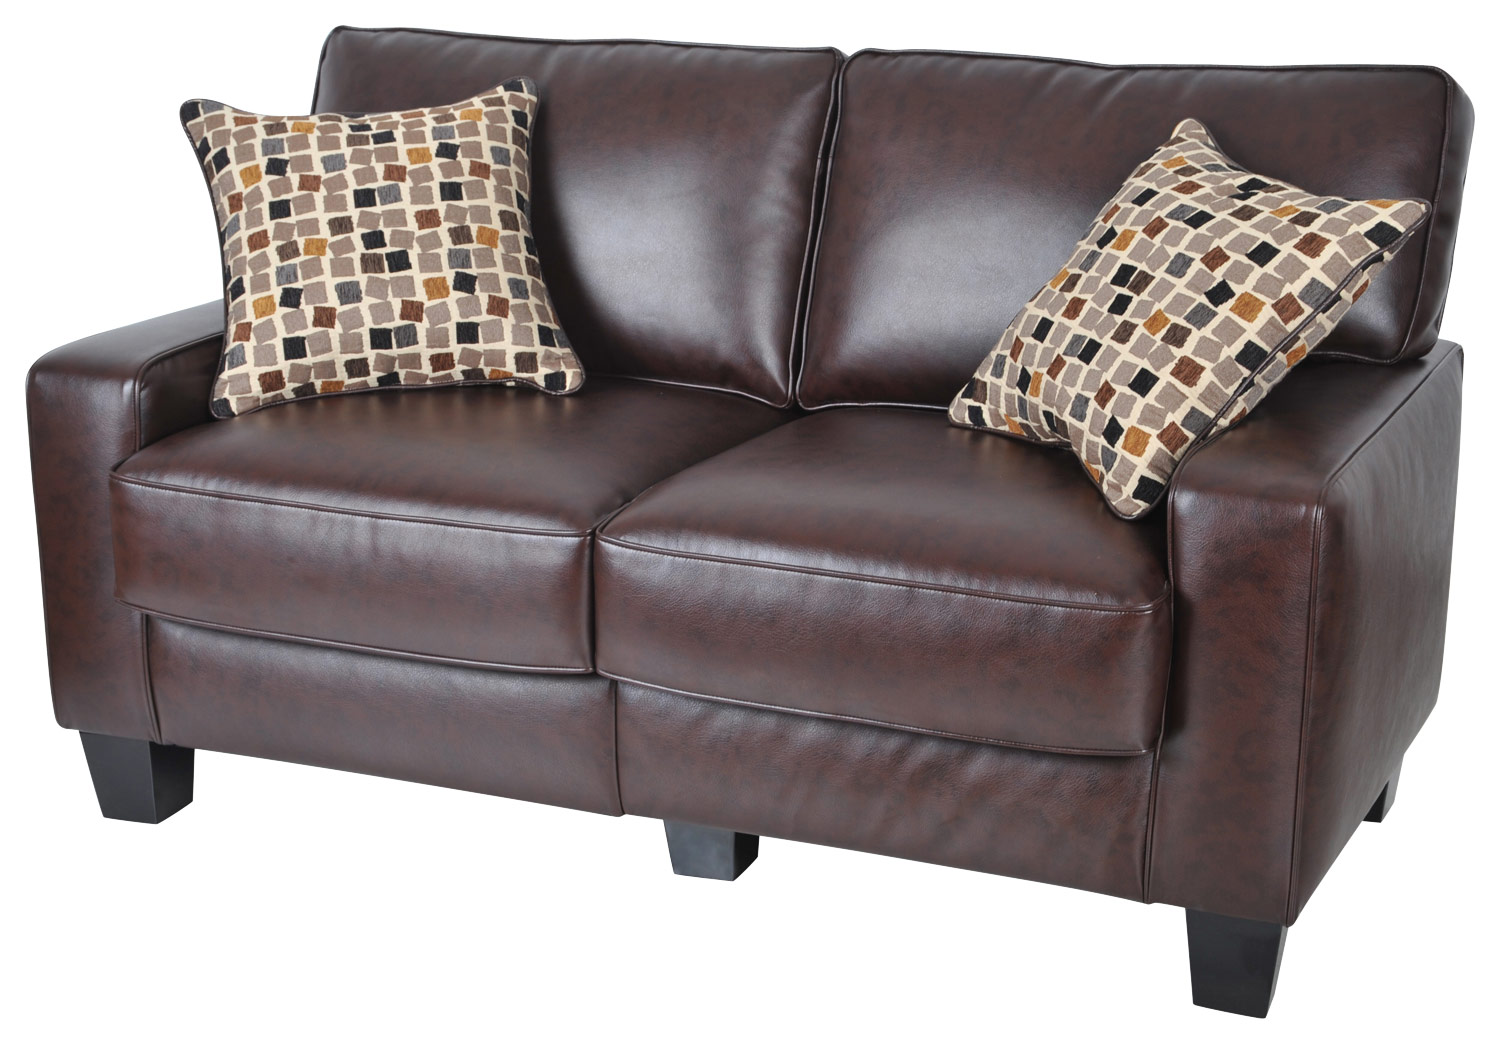 Serta - RTA Monaco Collection 61" Leather Loveseat Sofa - Biscuit Brown